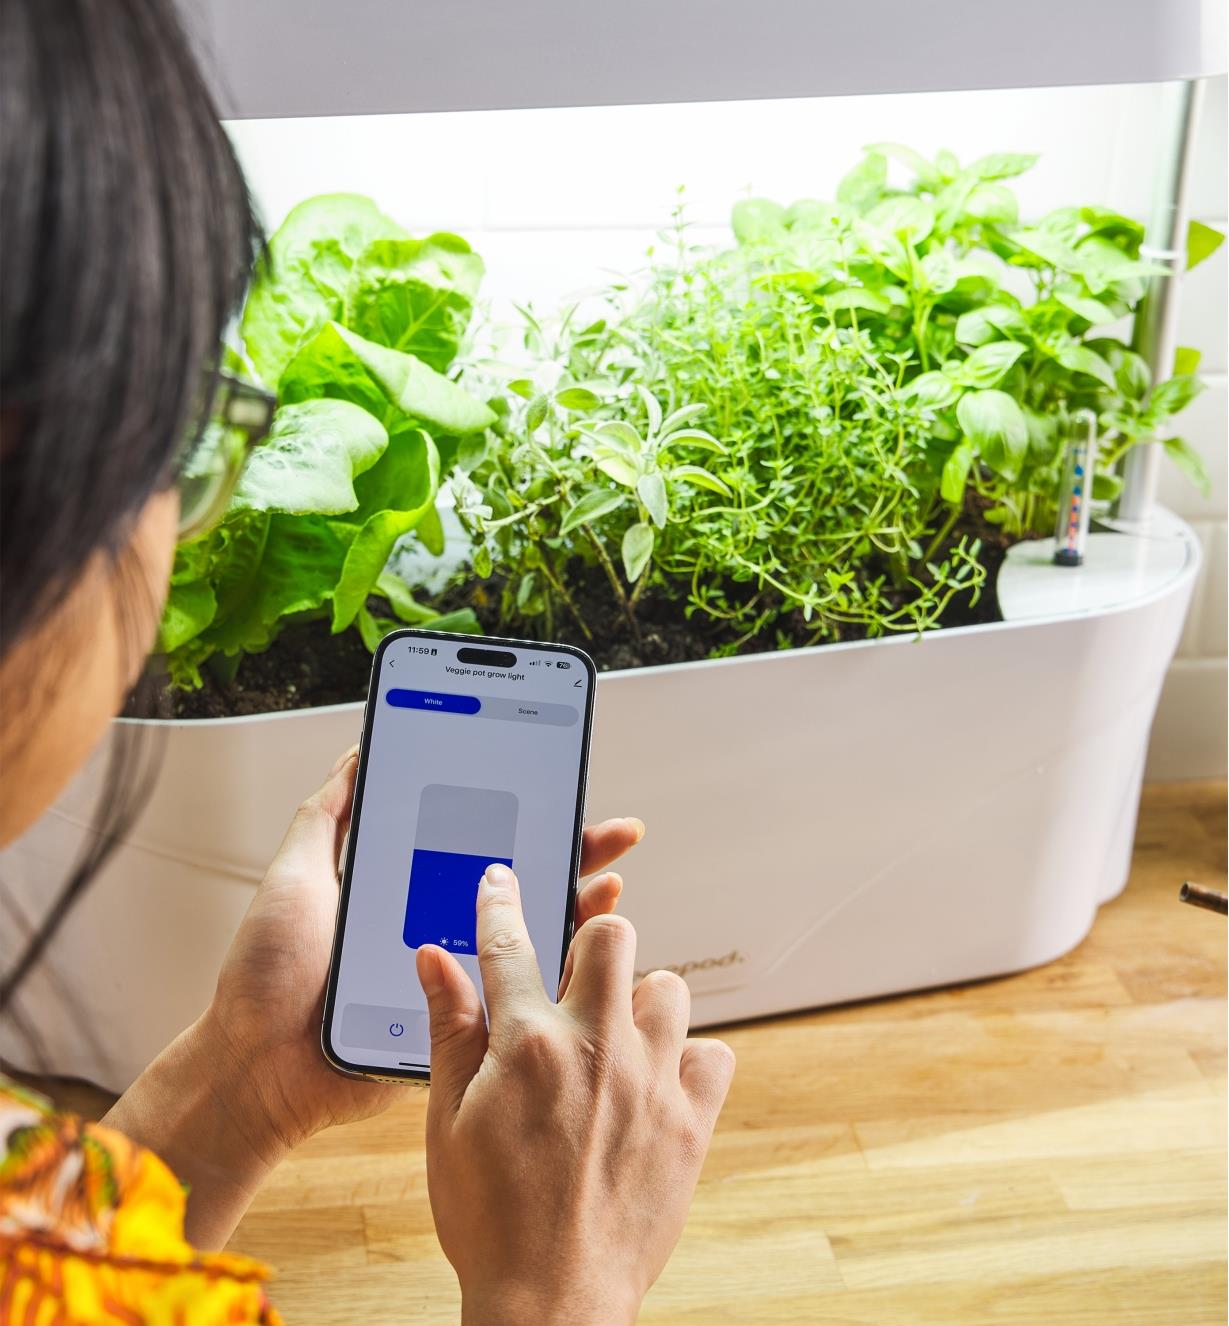 A person adjusts the light cycle of the LED grow light and planter through an app on a phone